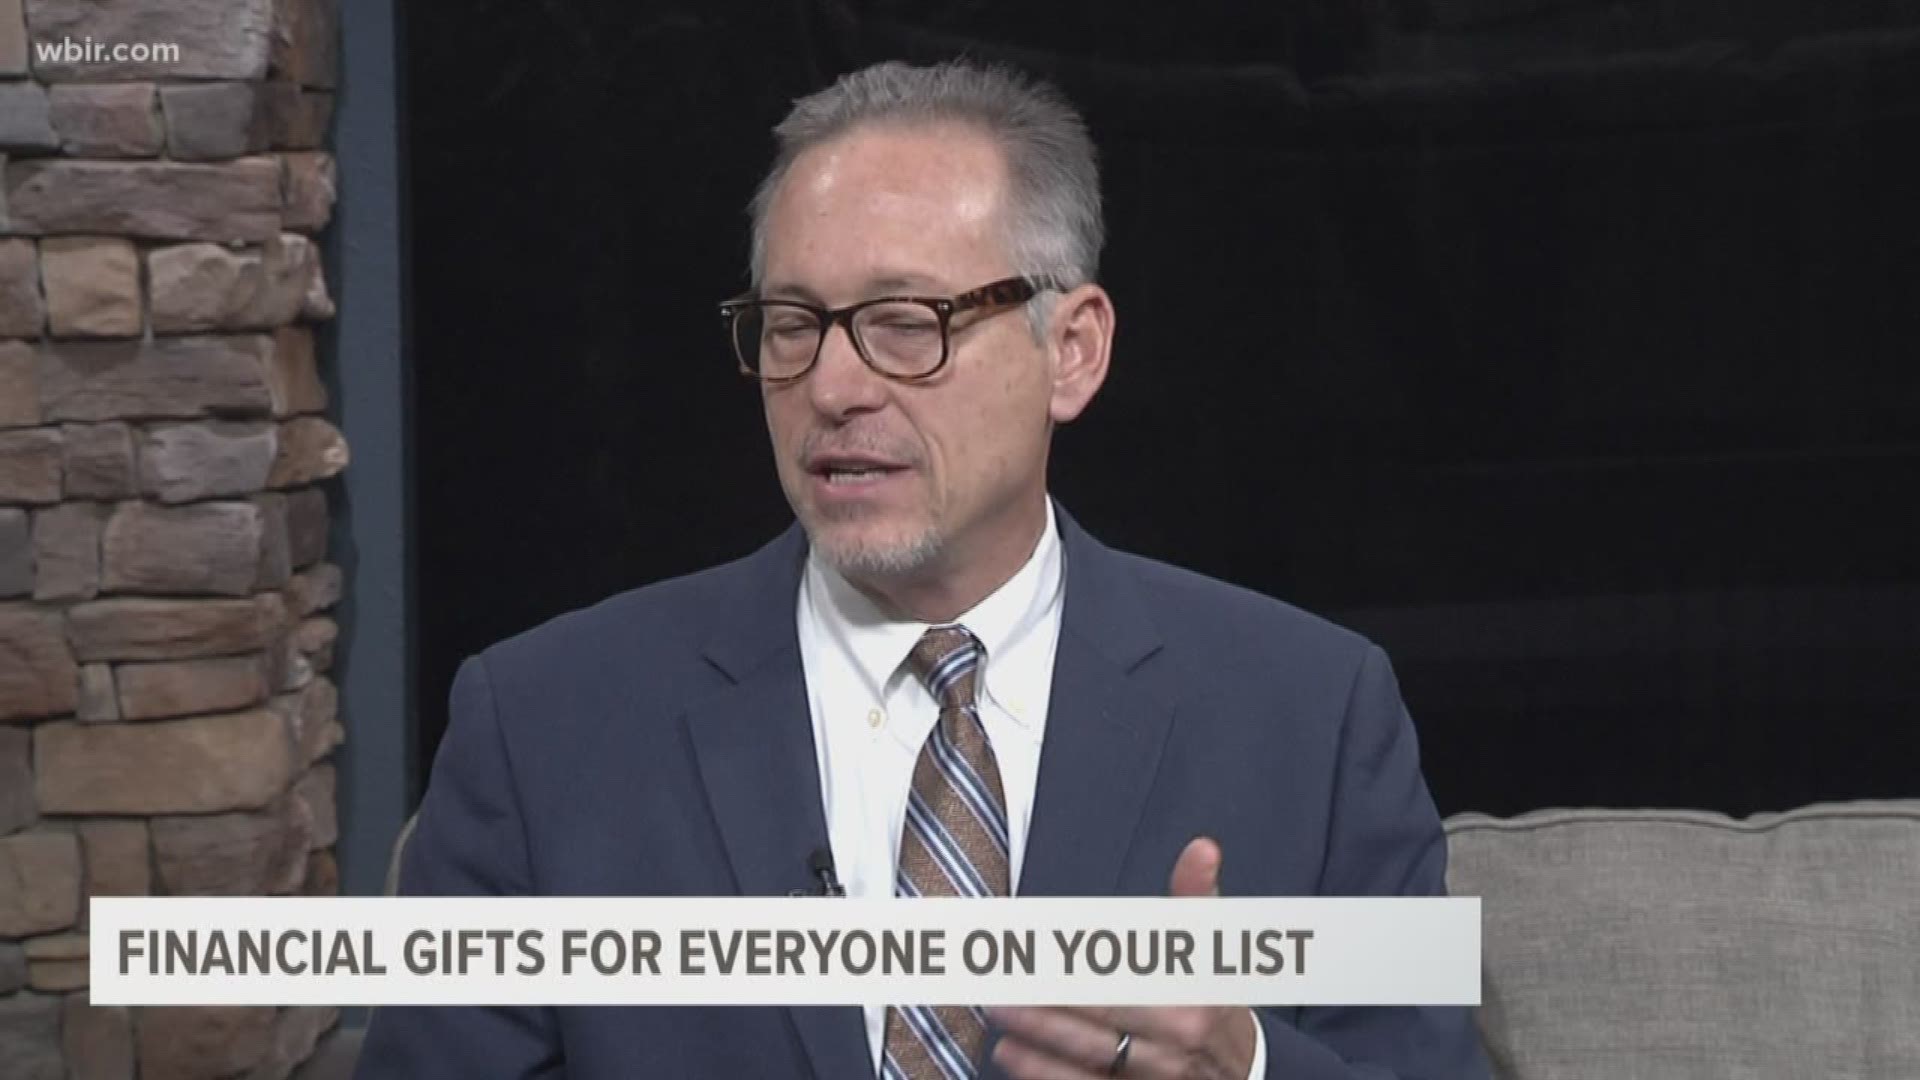 Sometimes finding the right Christmas gift can be difficult. Certified Financial Adviser Paul Fain has some ideas on gifts that can help set your loved ones up for future success.